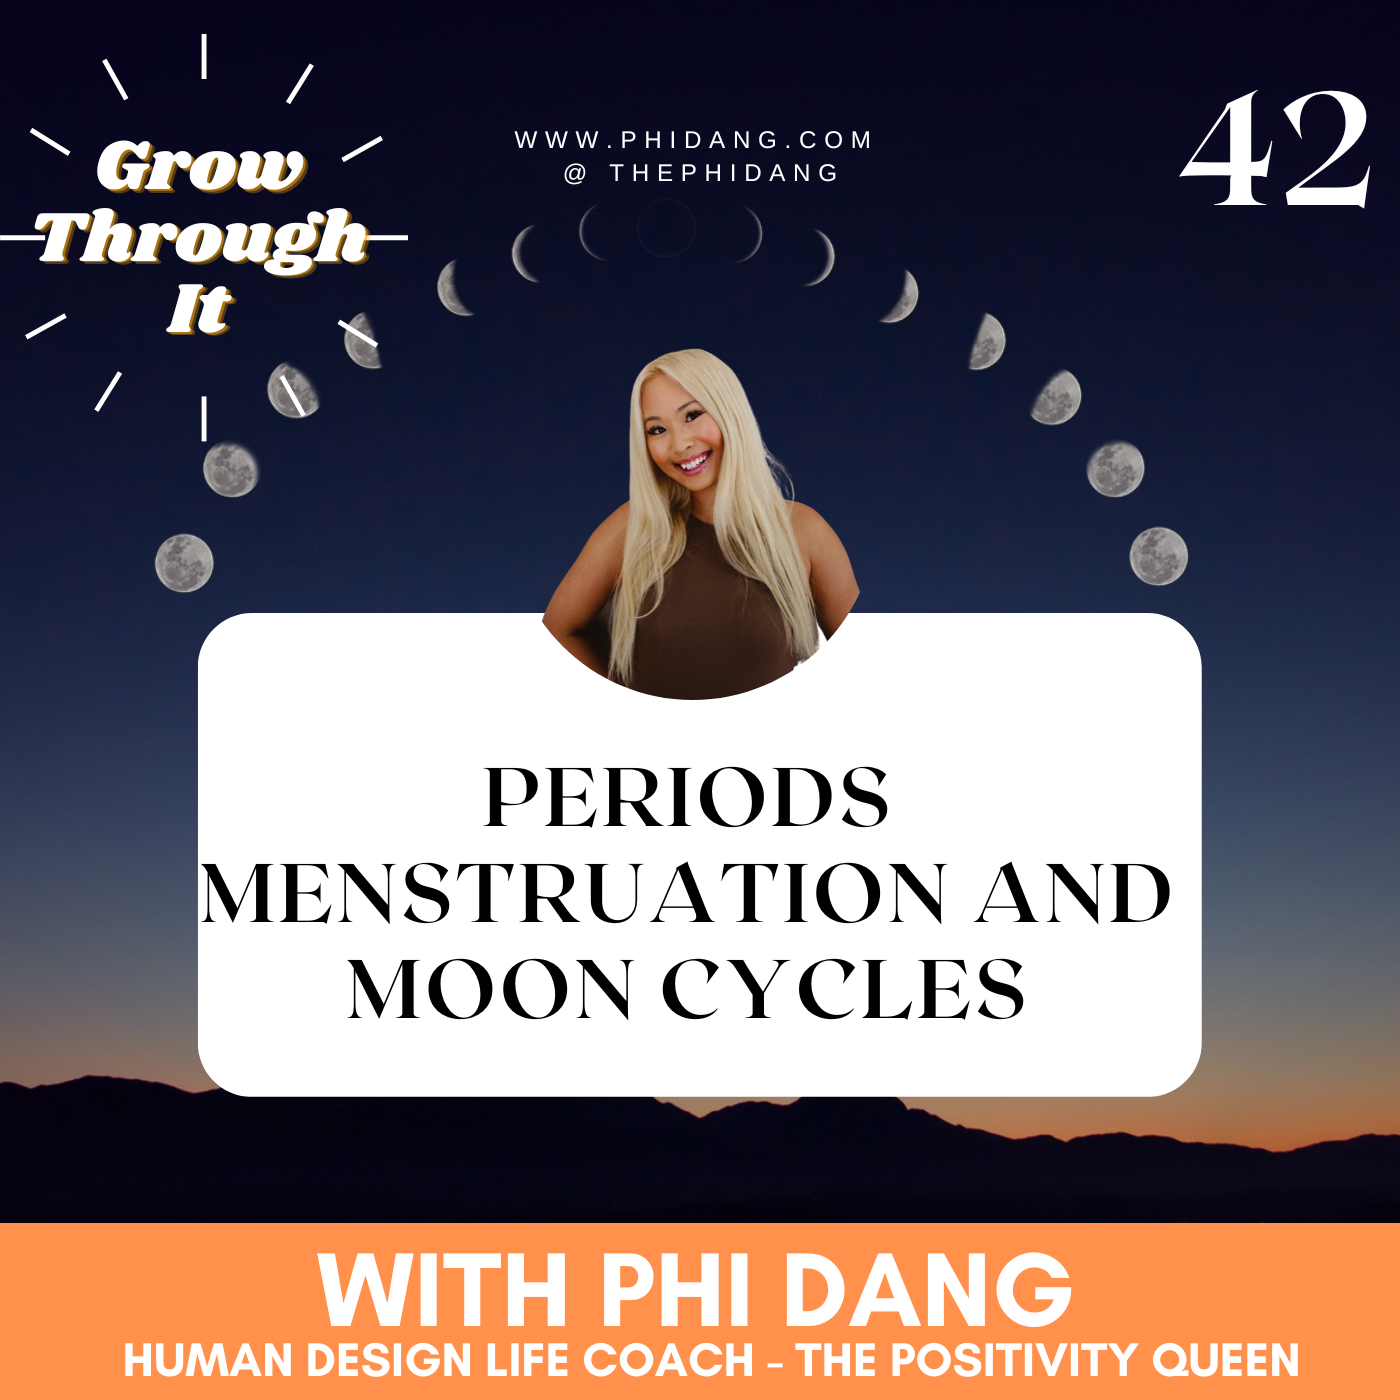 Your Menstrual Cycle Is Not in Sync With the Moon